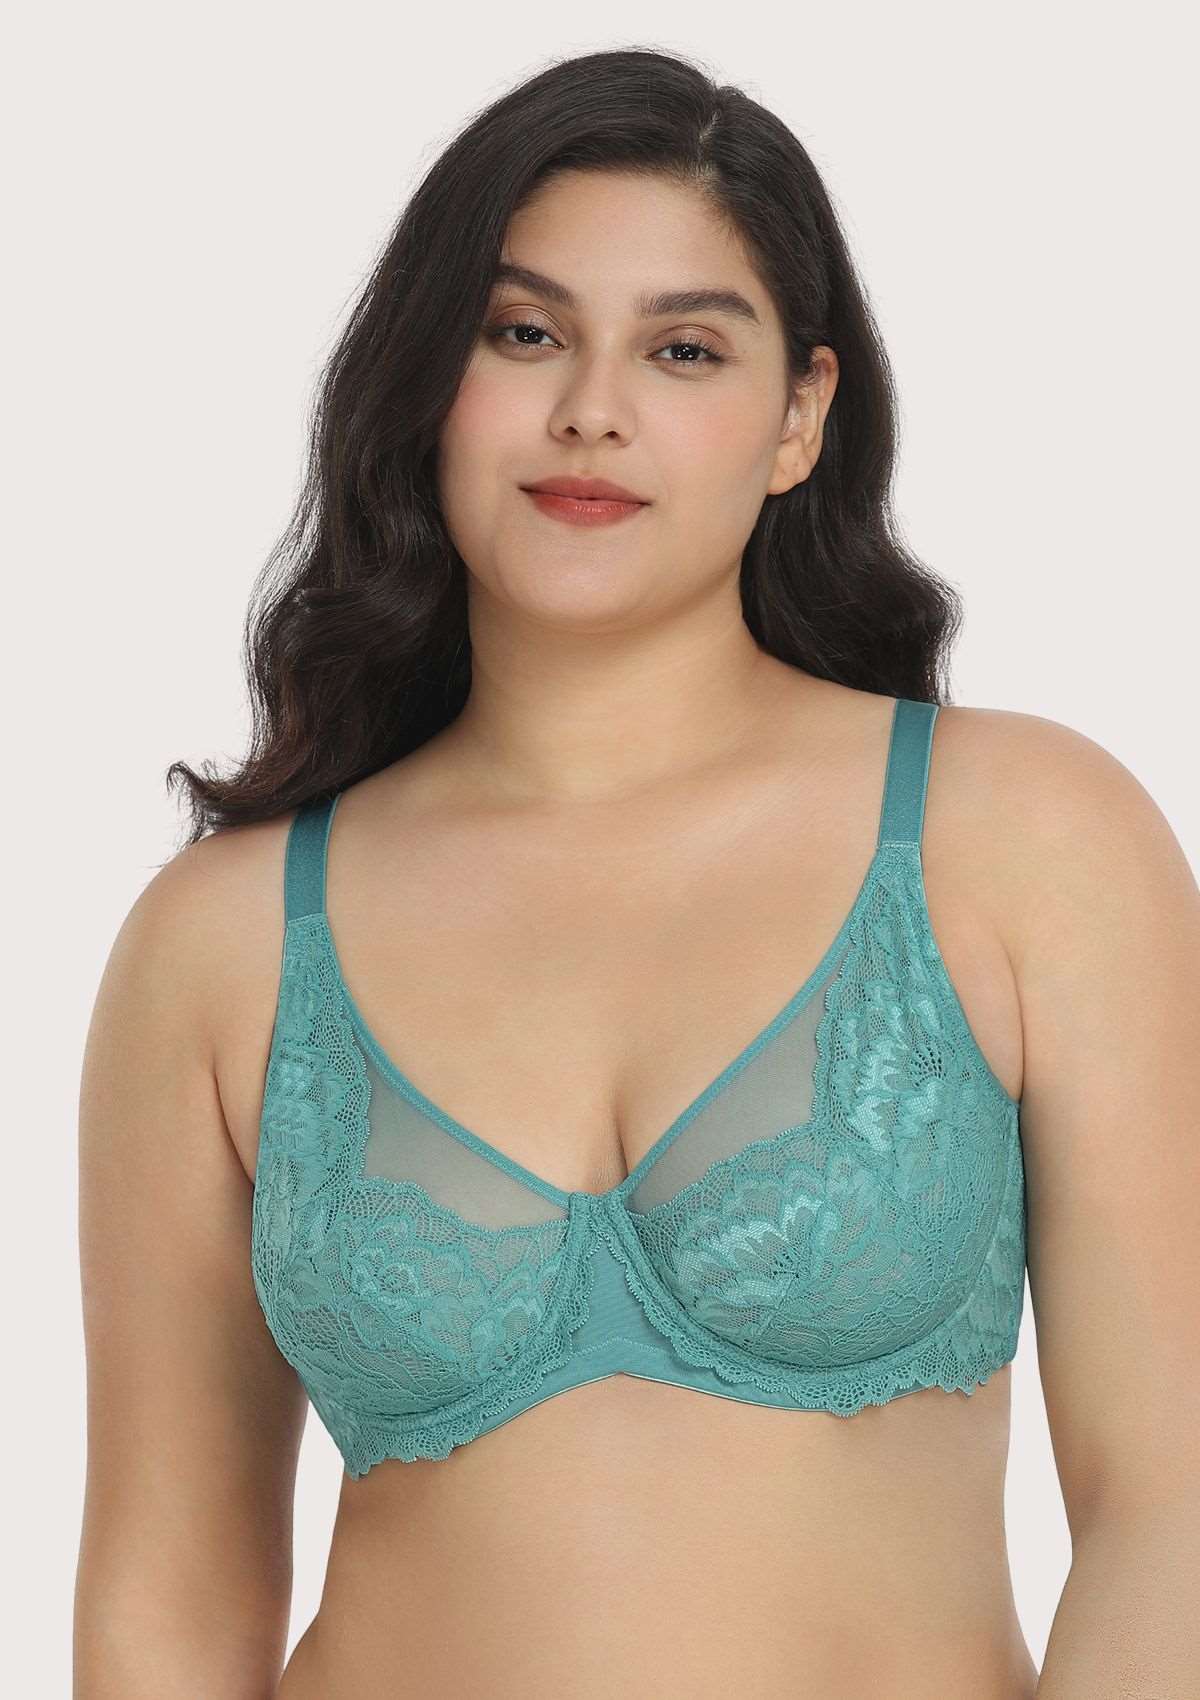 HSIA Paeonia Lace Full Coverage Underwire Non-Padded Uplifting Bra - Teal / 38 / D